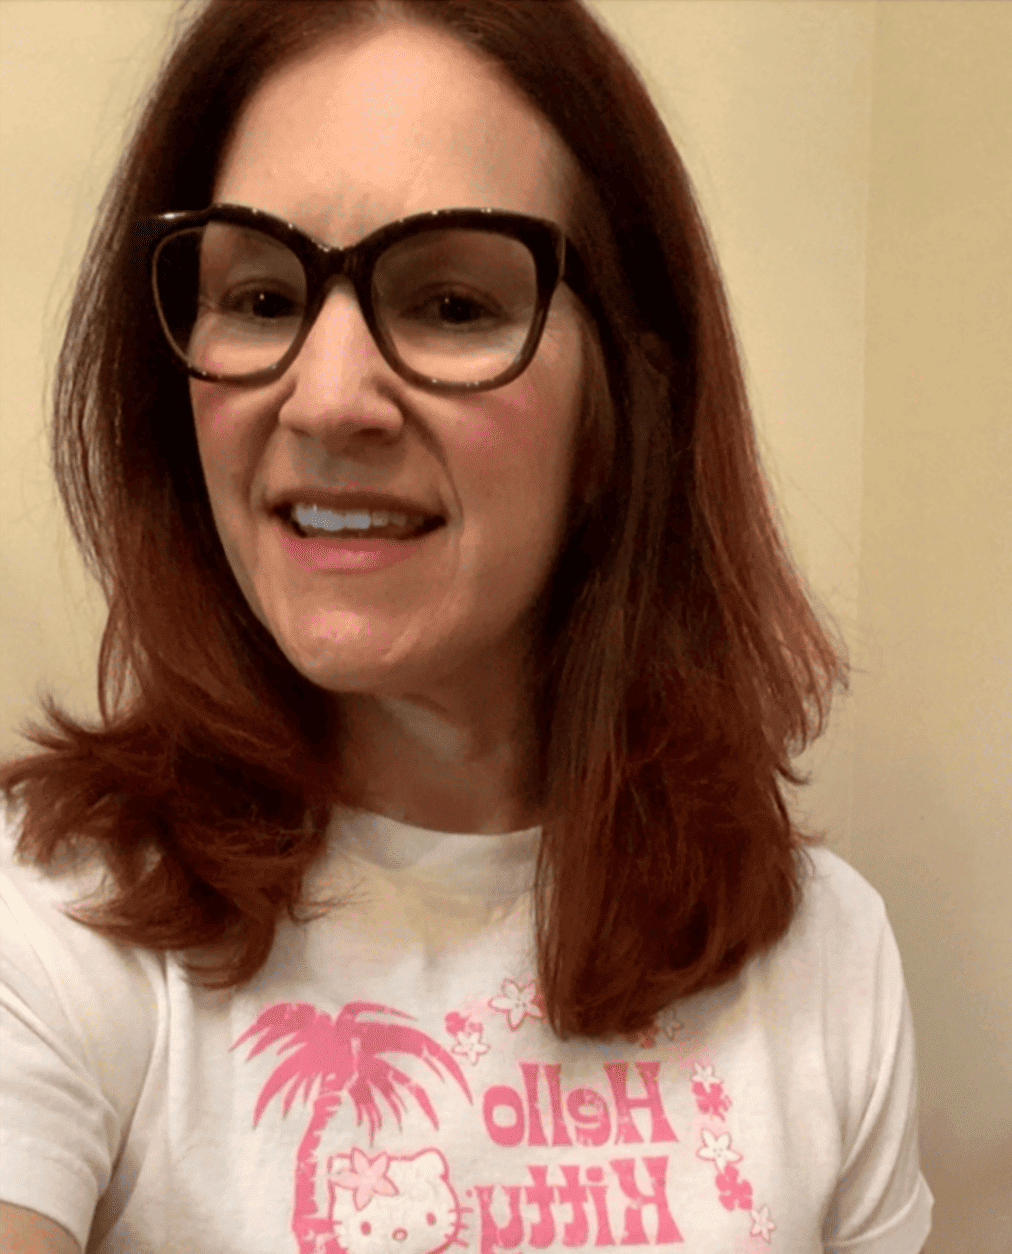 Selfie of a redheaded woman wearing glasses and a Hello Kitty shirt